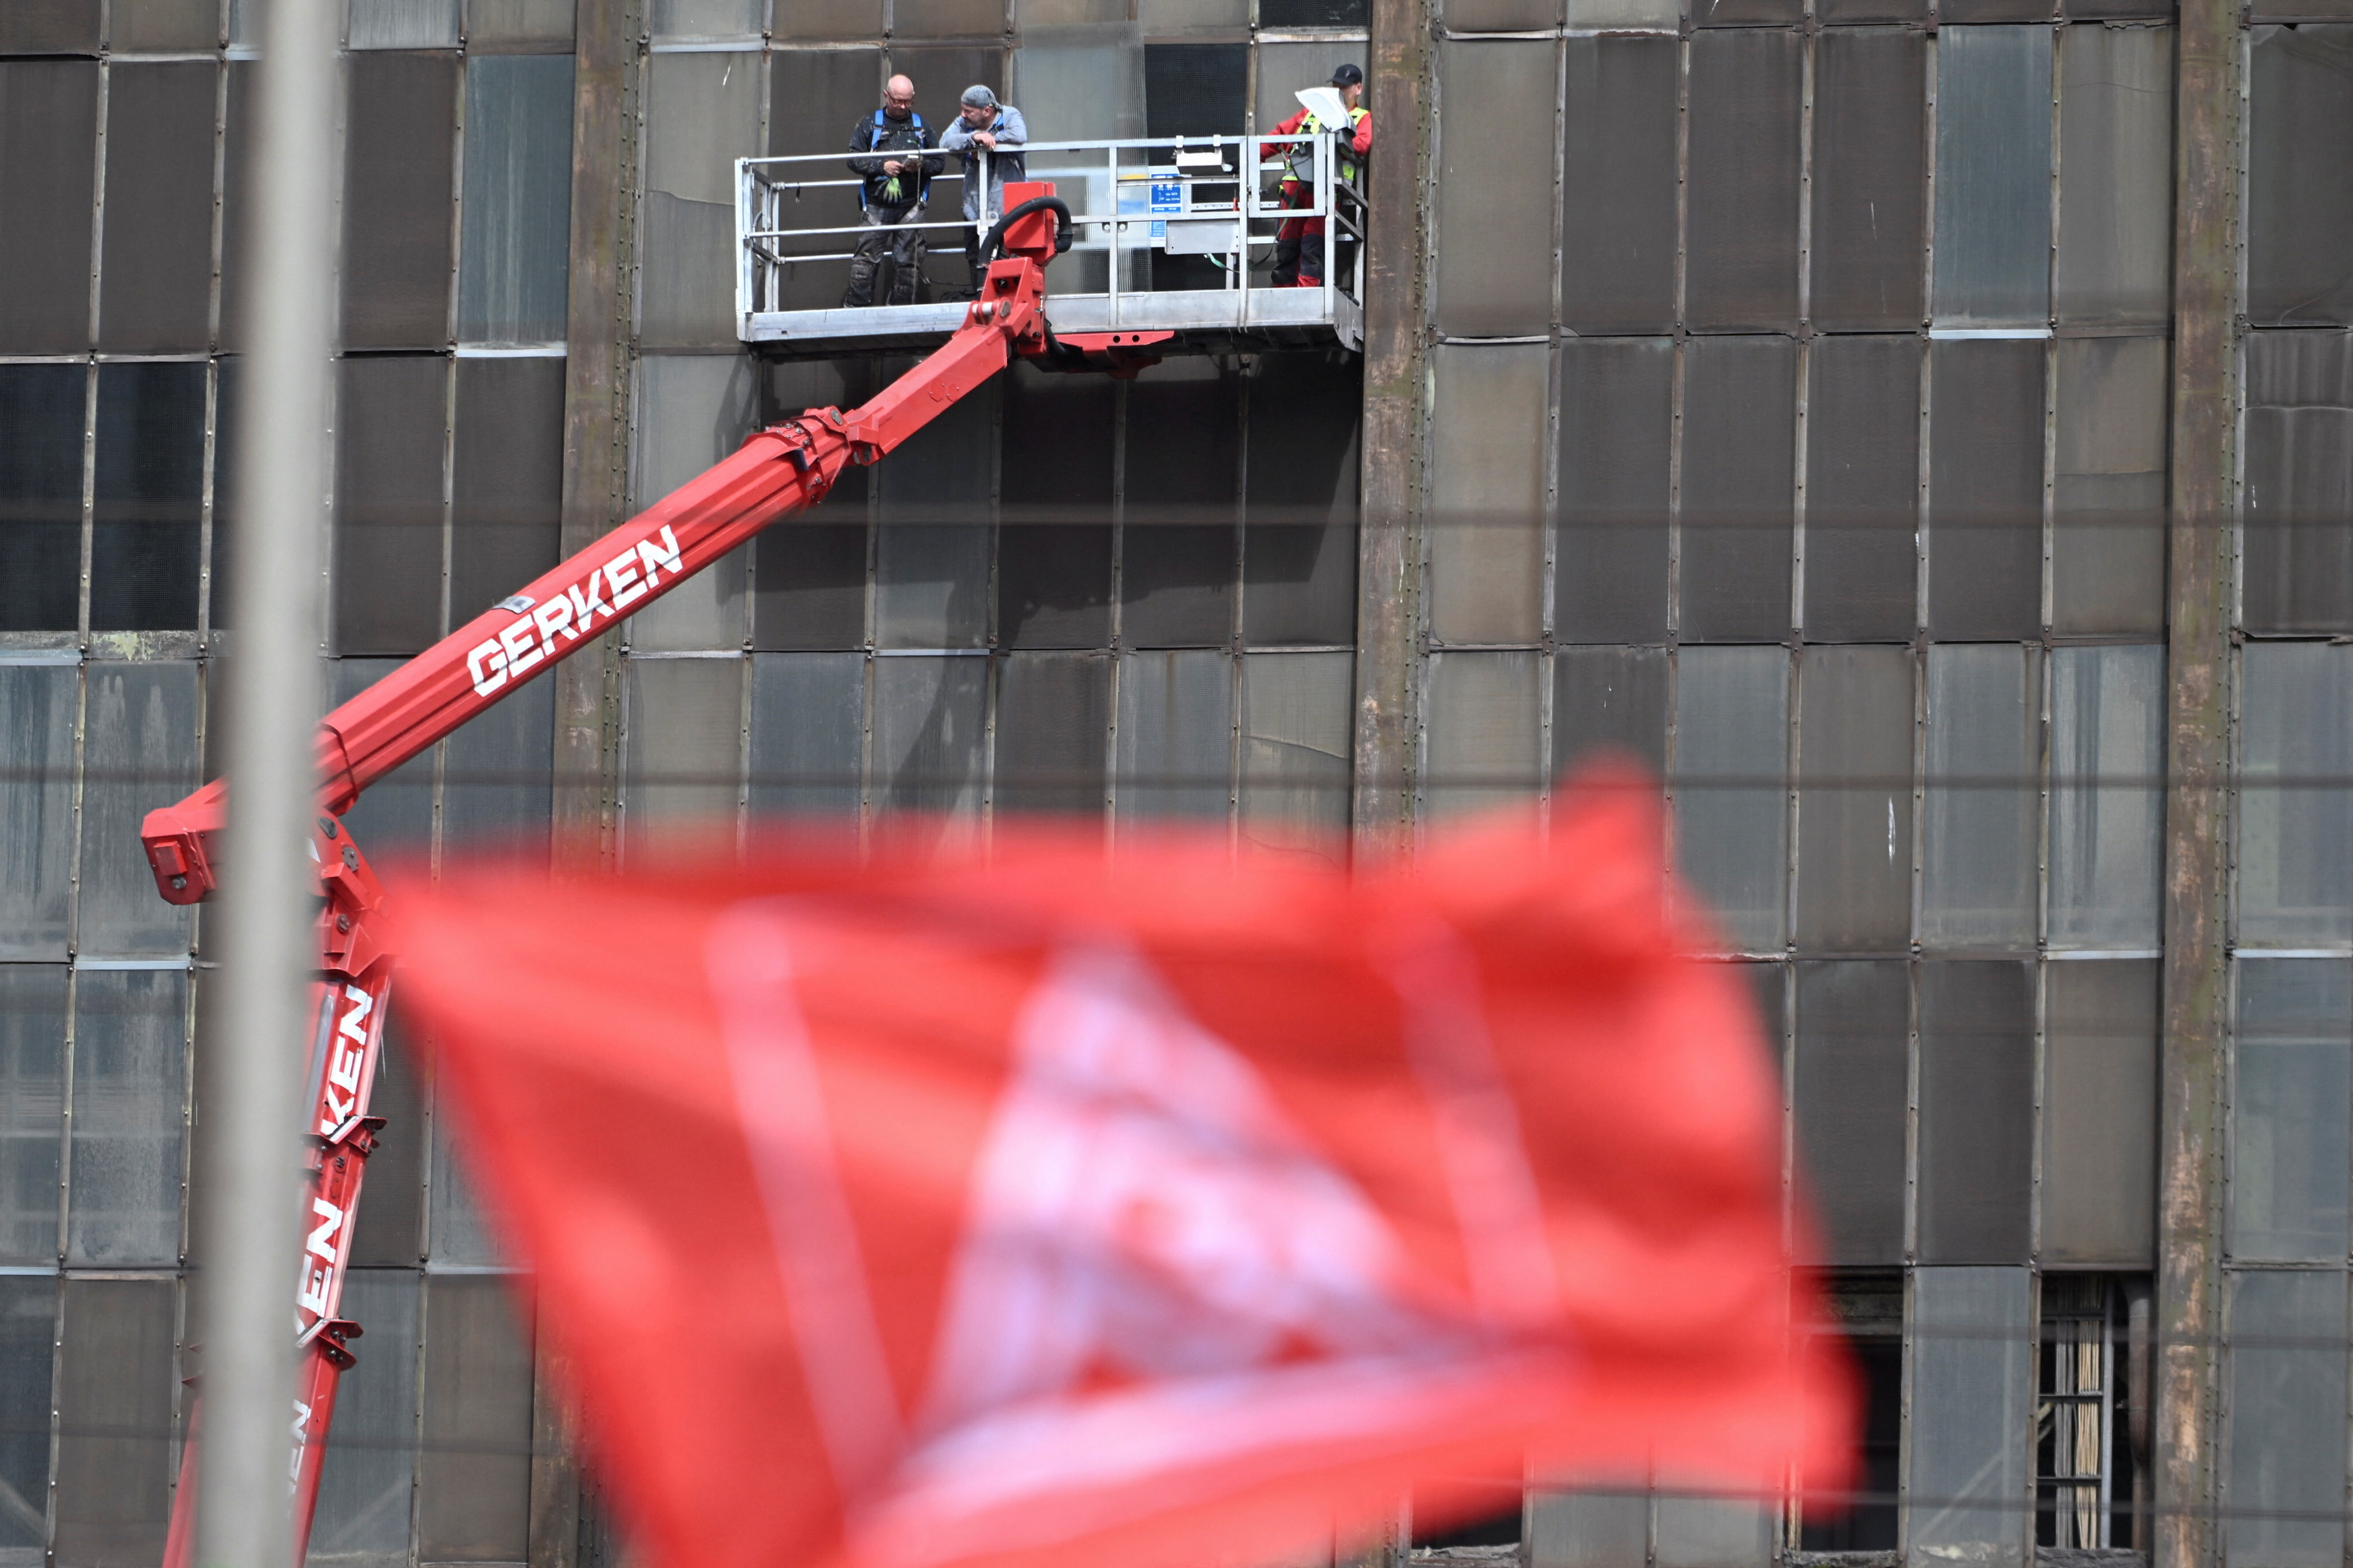 Thyssenkrupp Steel Europe workers rally at IG Metall union demonstration in Duisburg